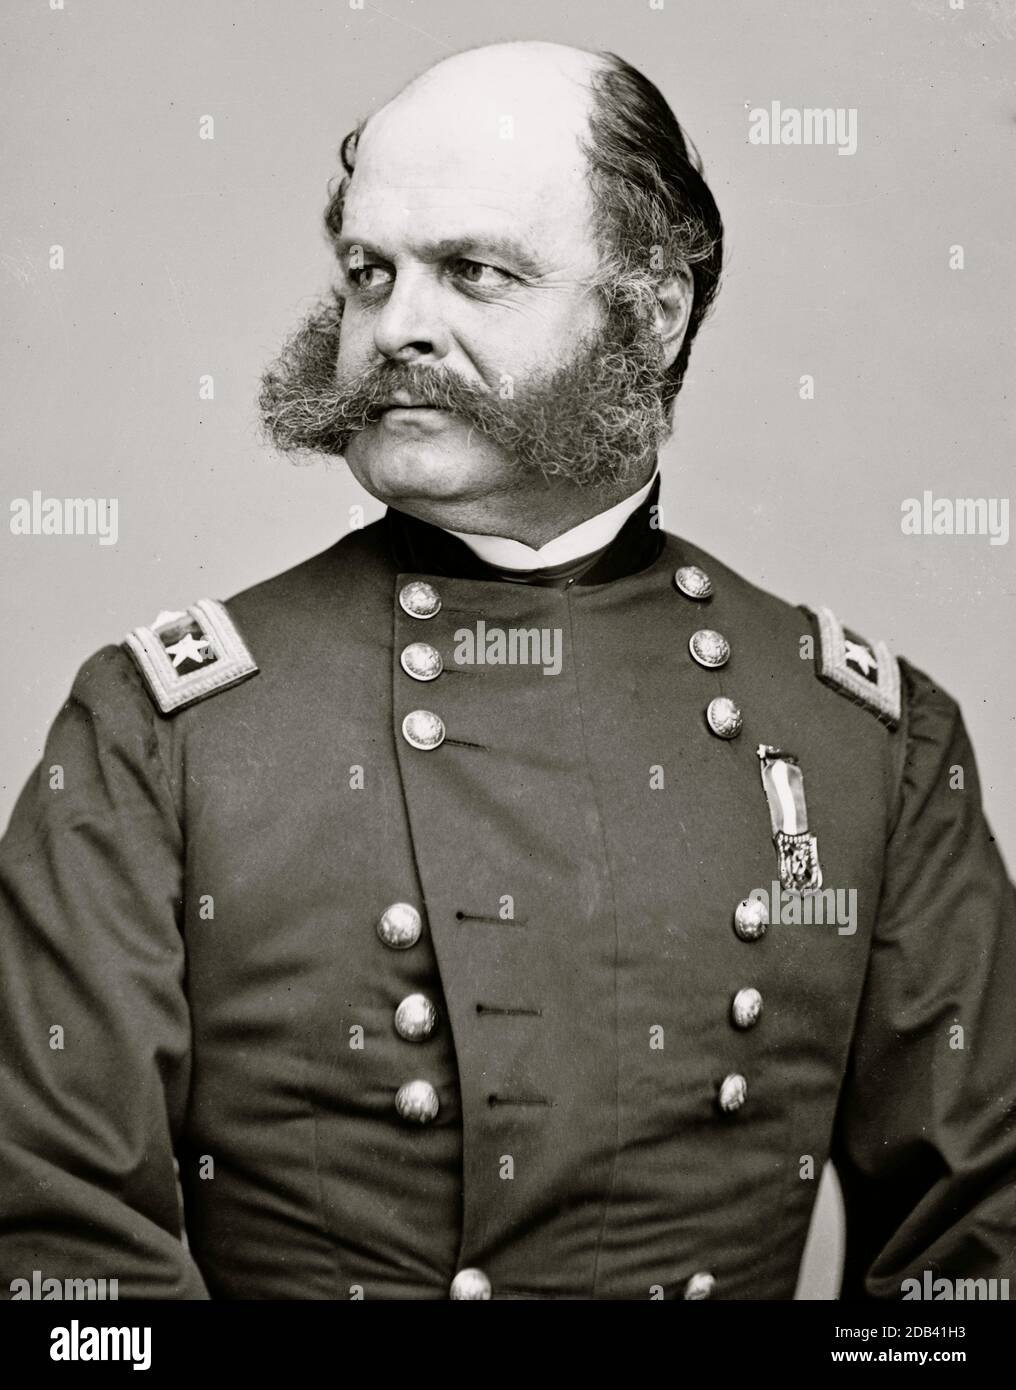 Portrait of Maj. Gen. Ambrose E. Burnside, officer of the Federal Army. Stock Photo